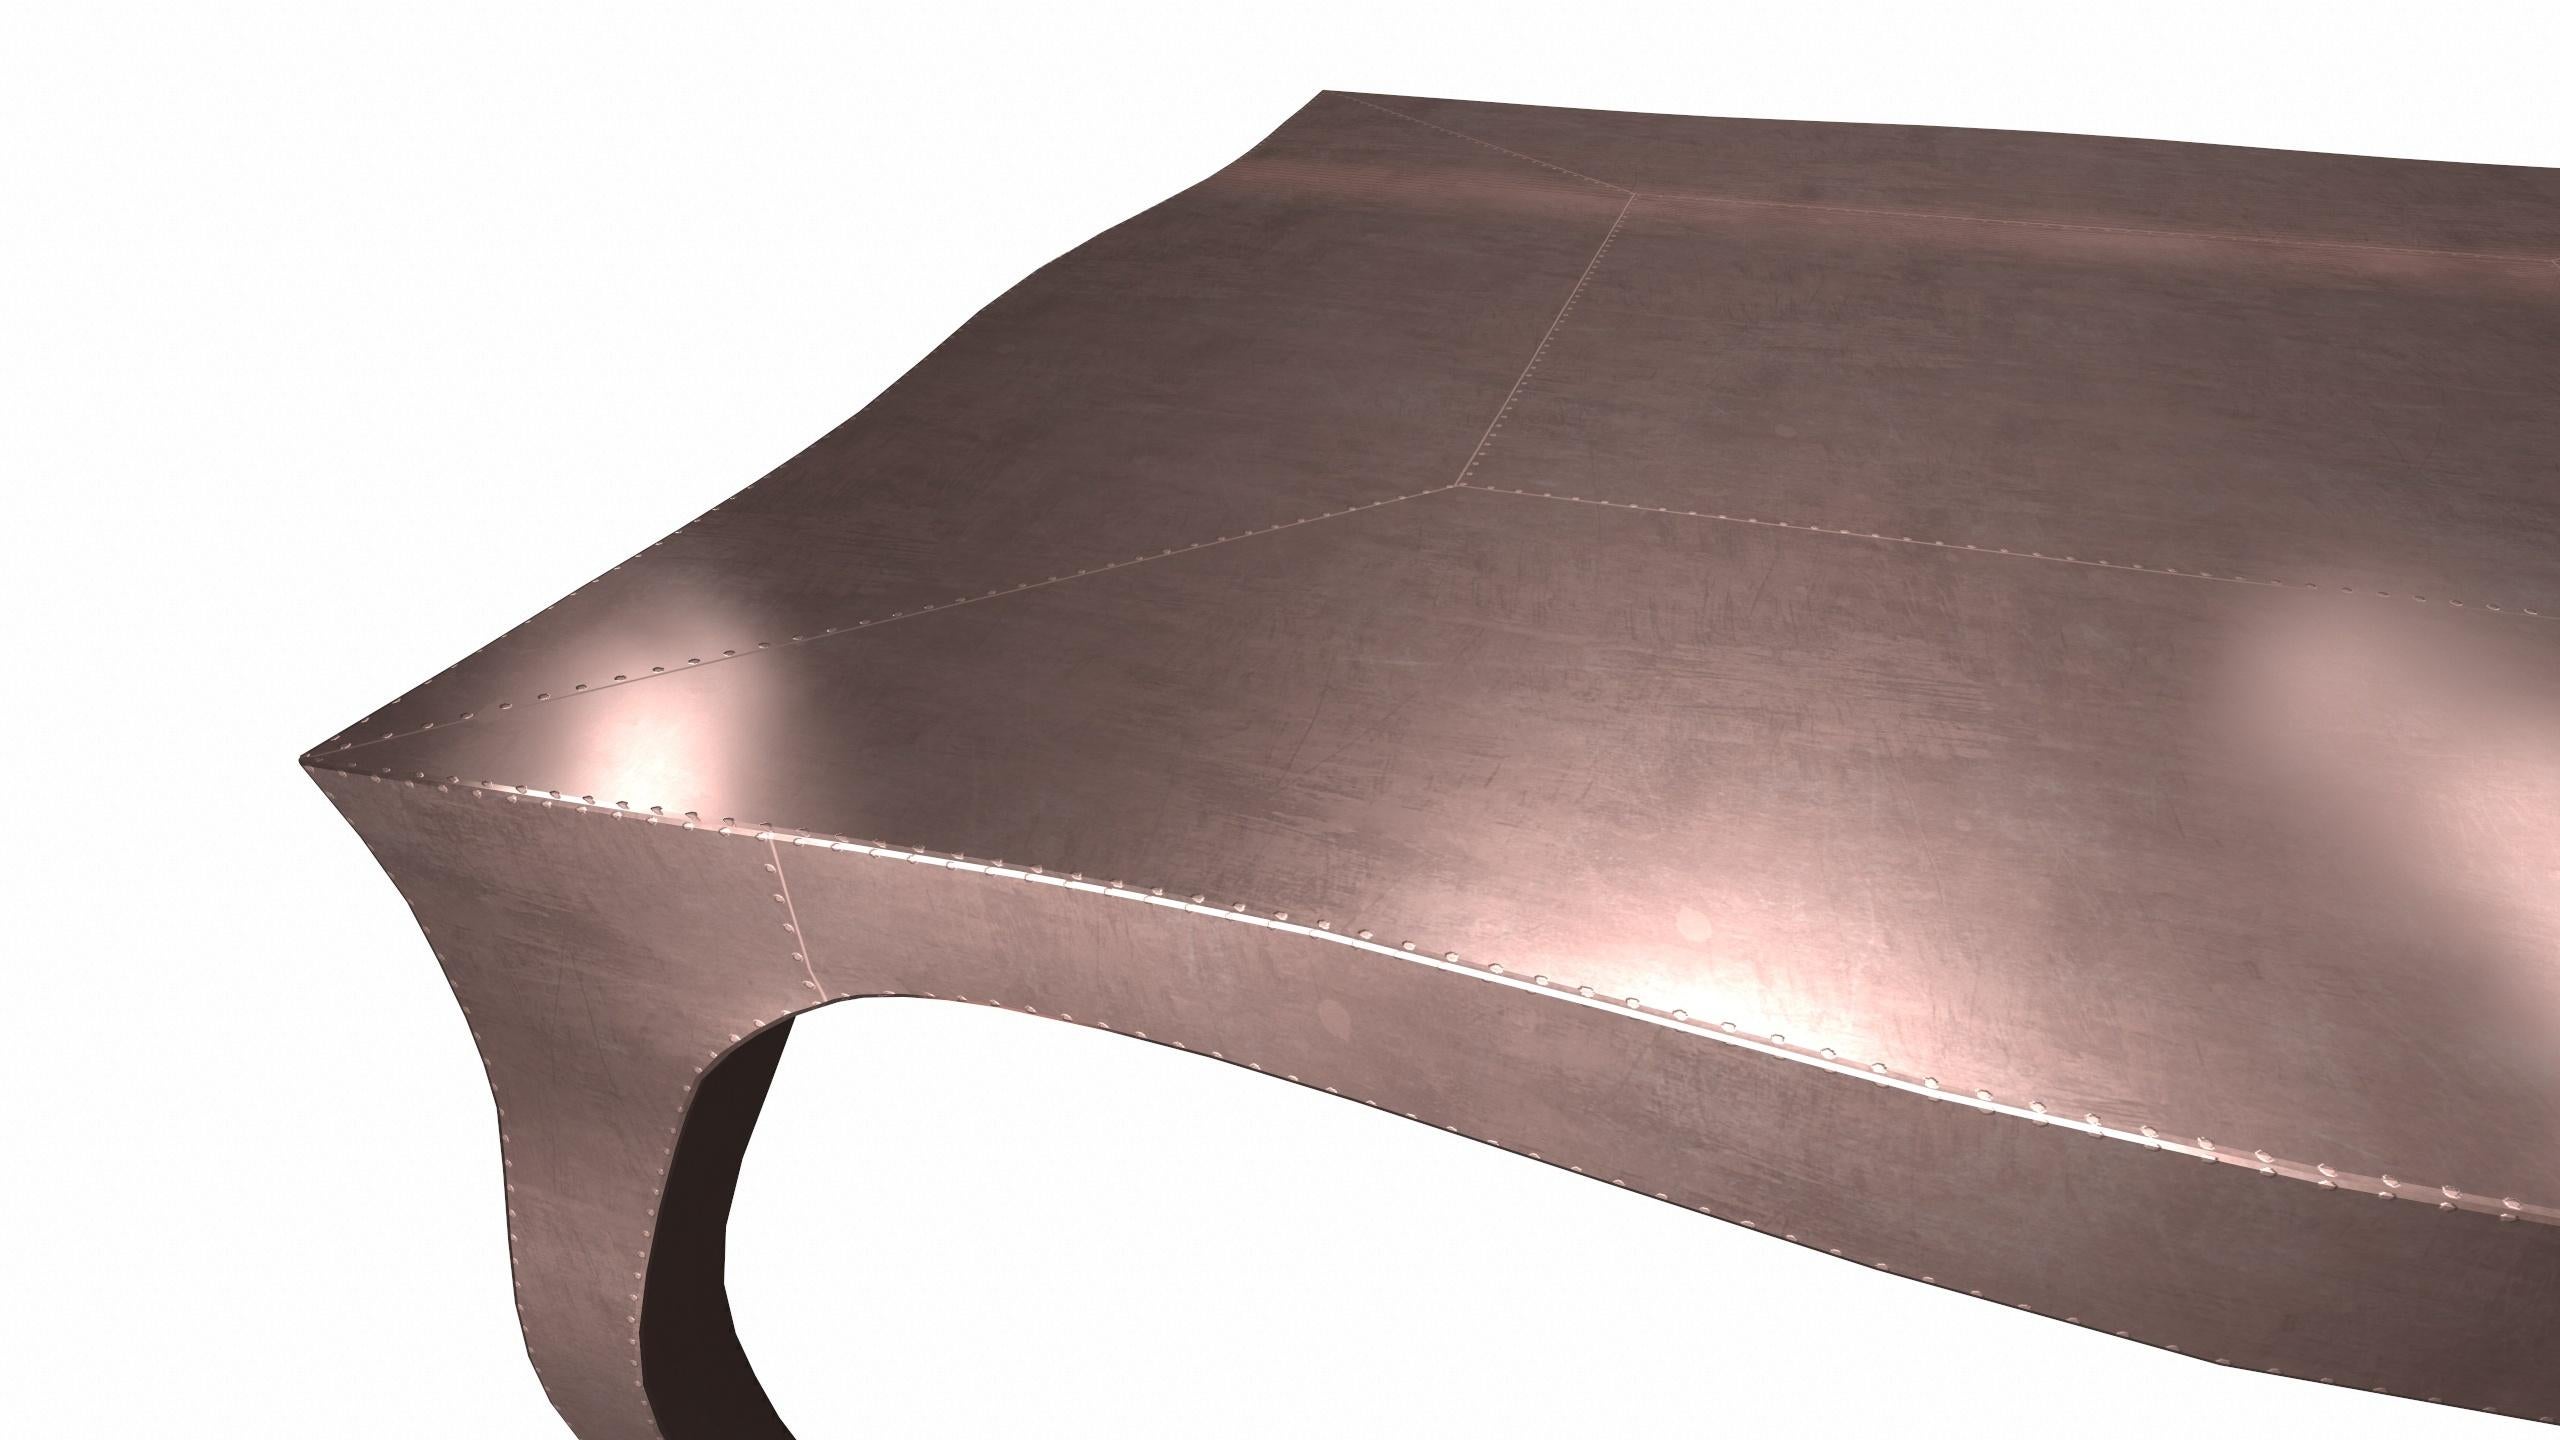 Other Louise Art Deco Center Tables Smooth Copper 18.5x18.5x10 inch by Paul Mathieu For Sale